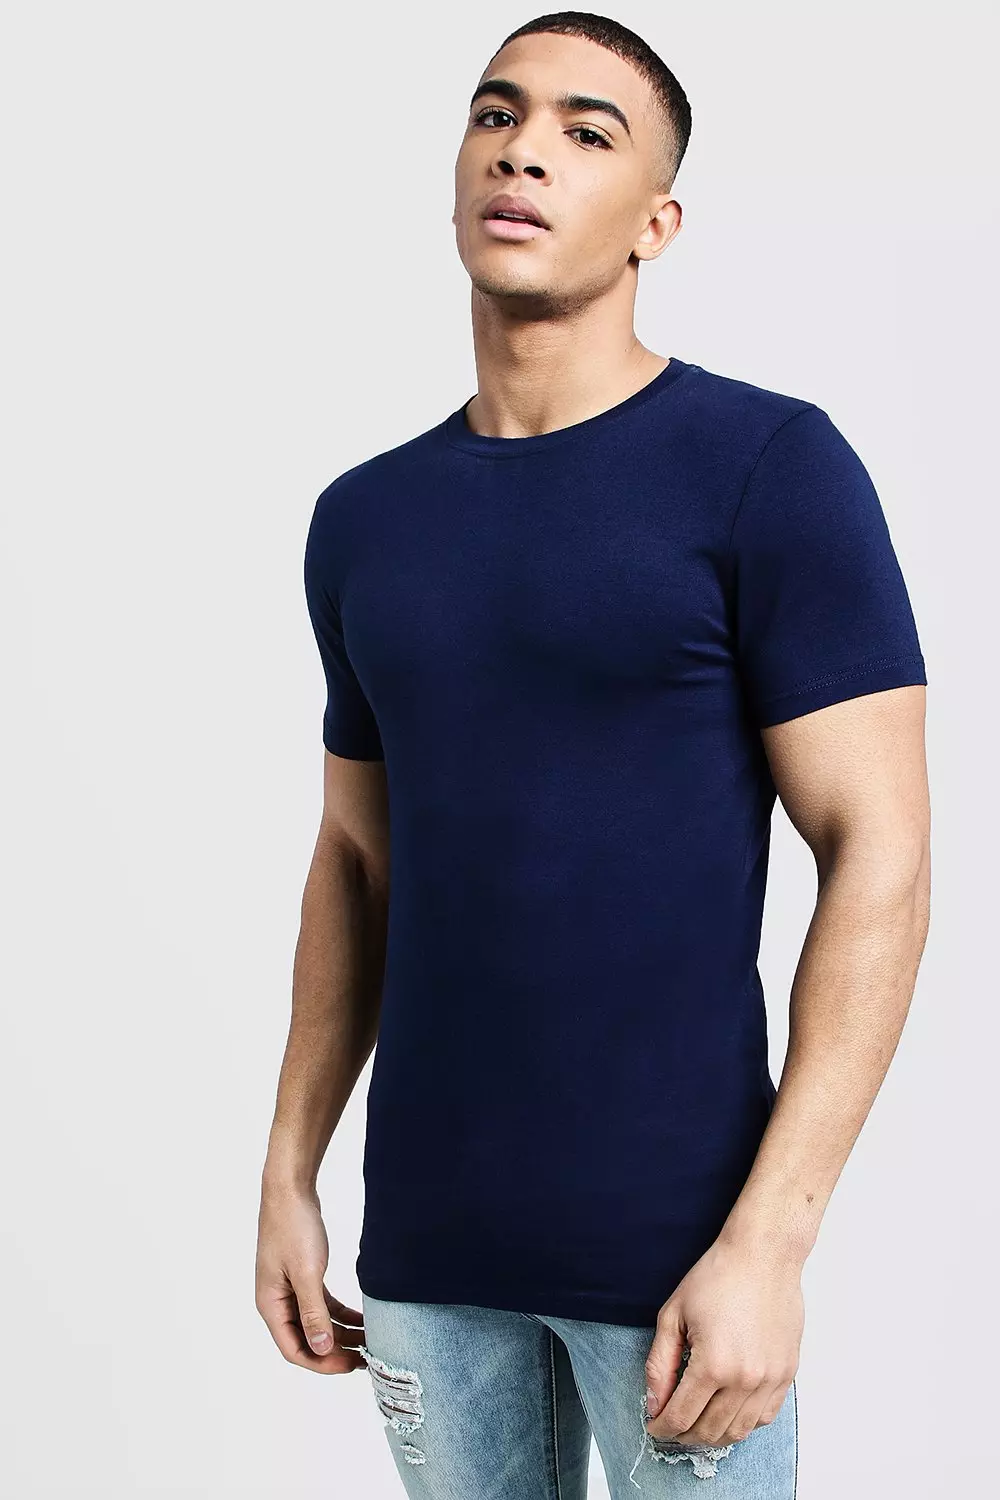 fond national flag sæt ind Muscle Fit Crew Neck T Shirt | BoohooMAN